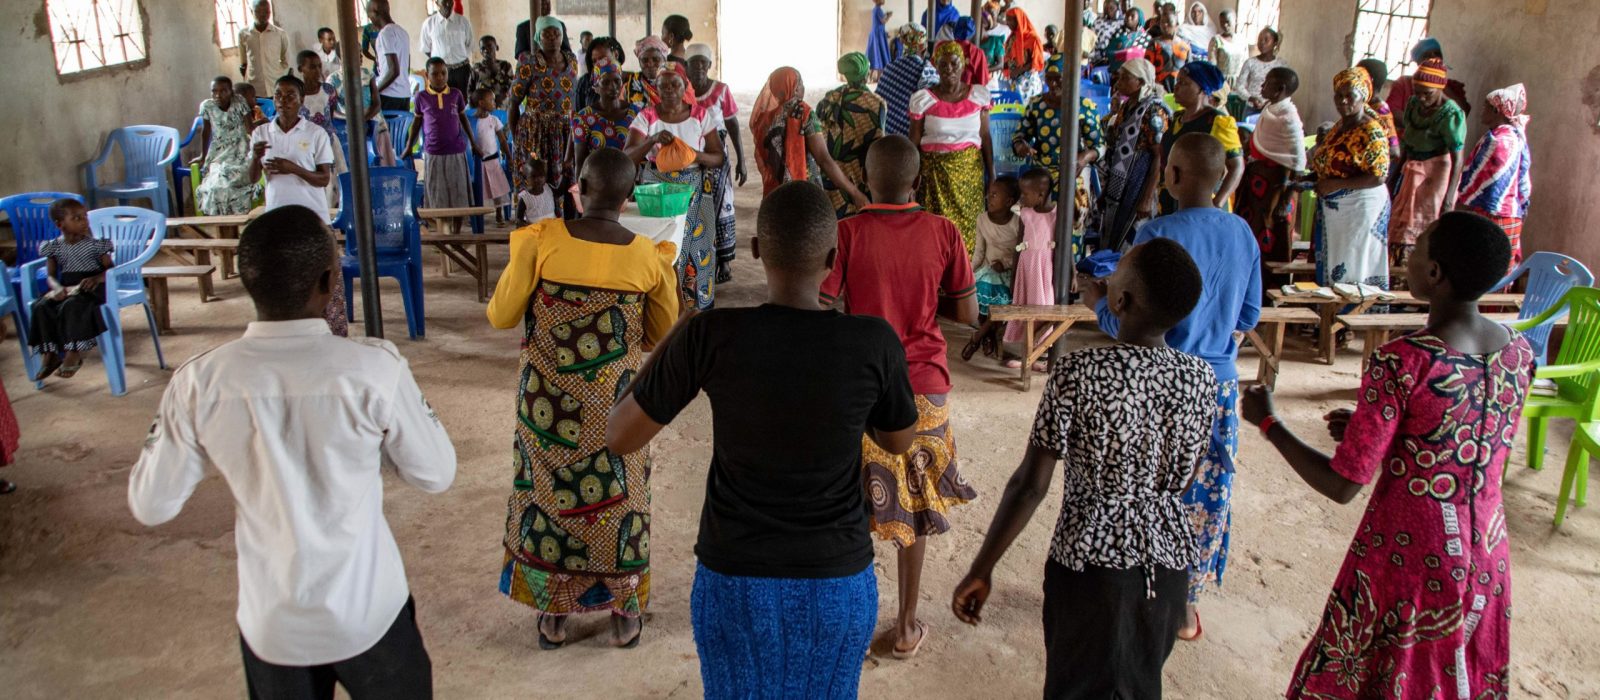 Faithful worshippers sing at church during mass in Dodoma, Tanzania, on 16 January 2022.
Tearfund Canada, through its Church-based Community Transformation, provides training in conservation agriculture and savings groups to farmers and their families.